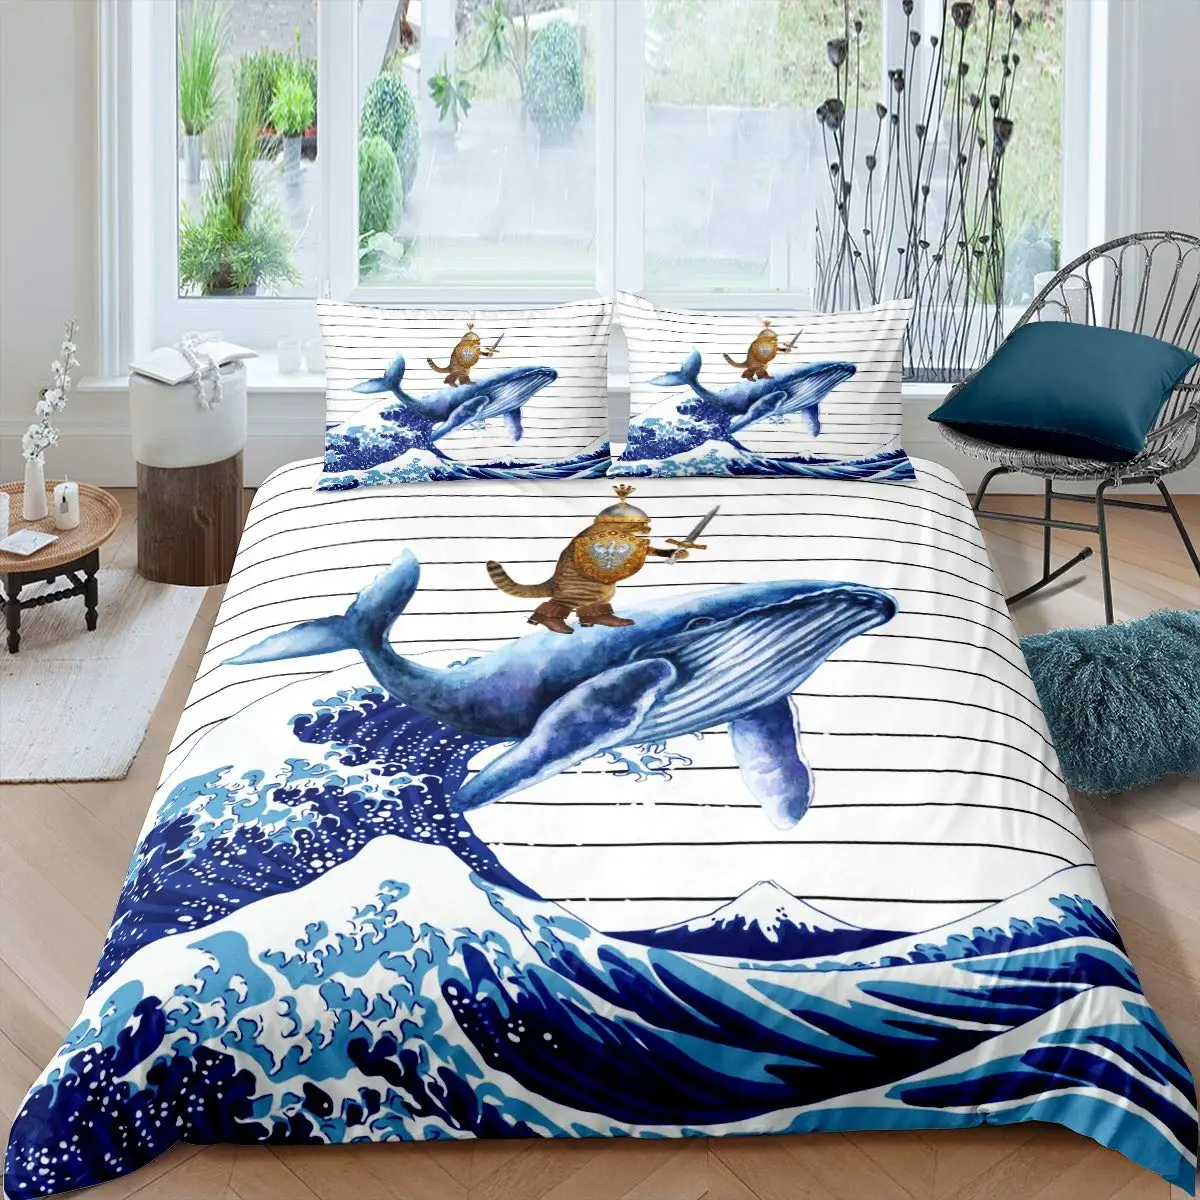 Cat Riding Whale Japanese-style Sea Wave Bedding Sets Stripe Lines Comforter Cover Full Queen